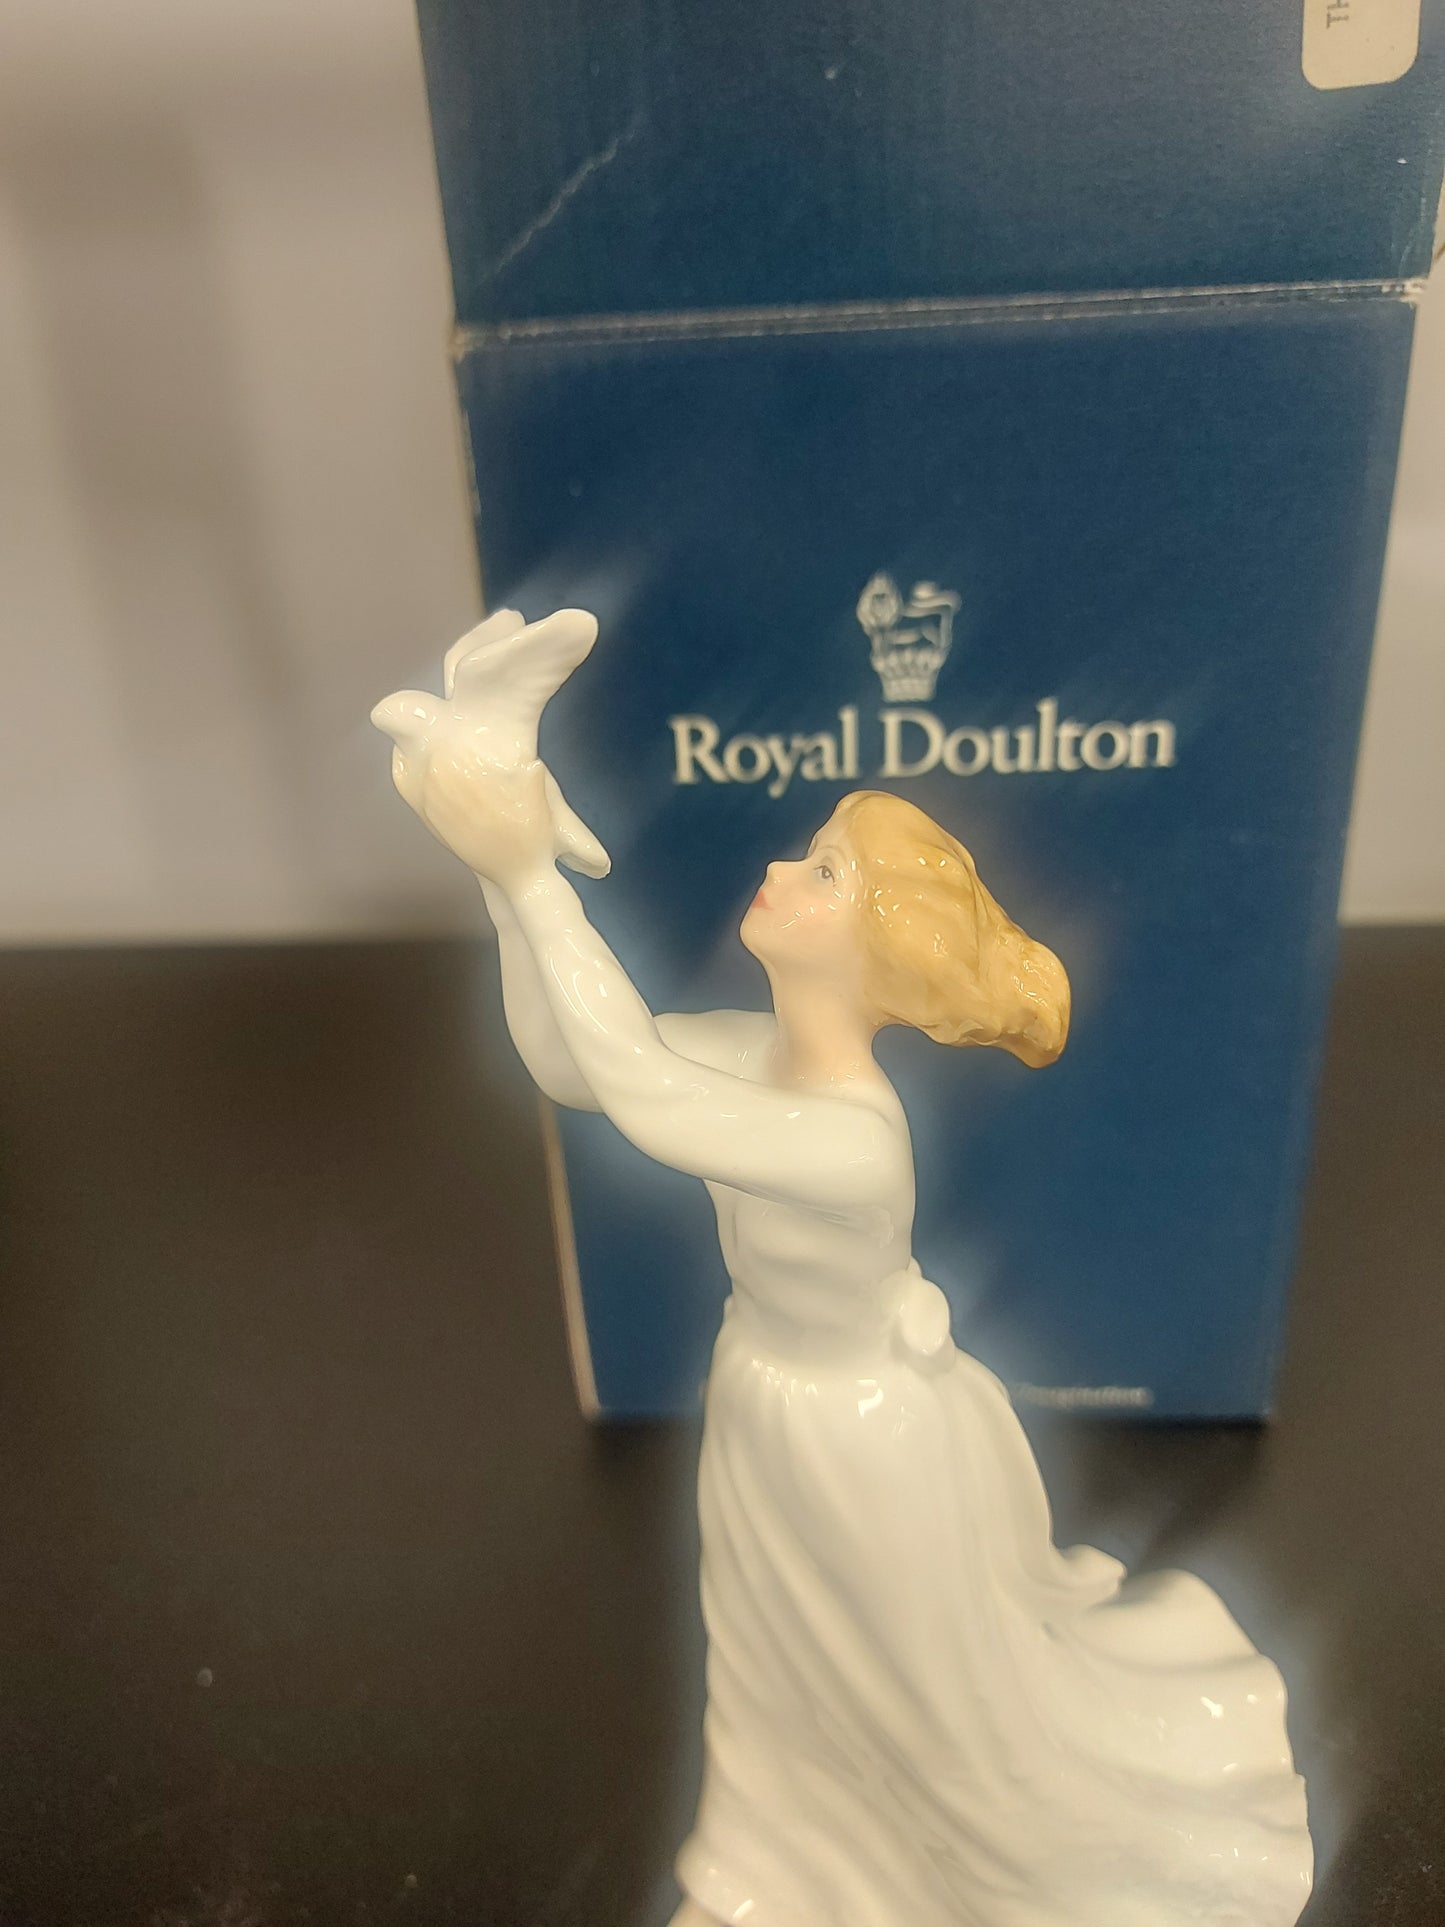 Last Chance Deal- ROYAL DOULTON FIGURINE "THINKING OF YOU" 1991 6 1/2" TALL